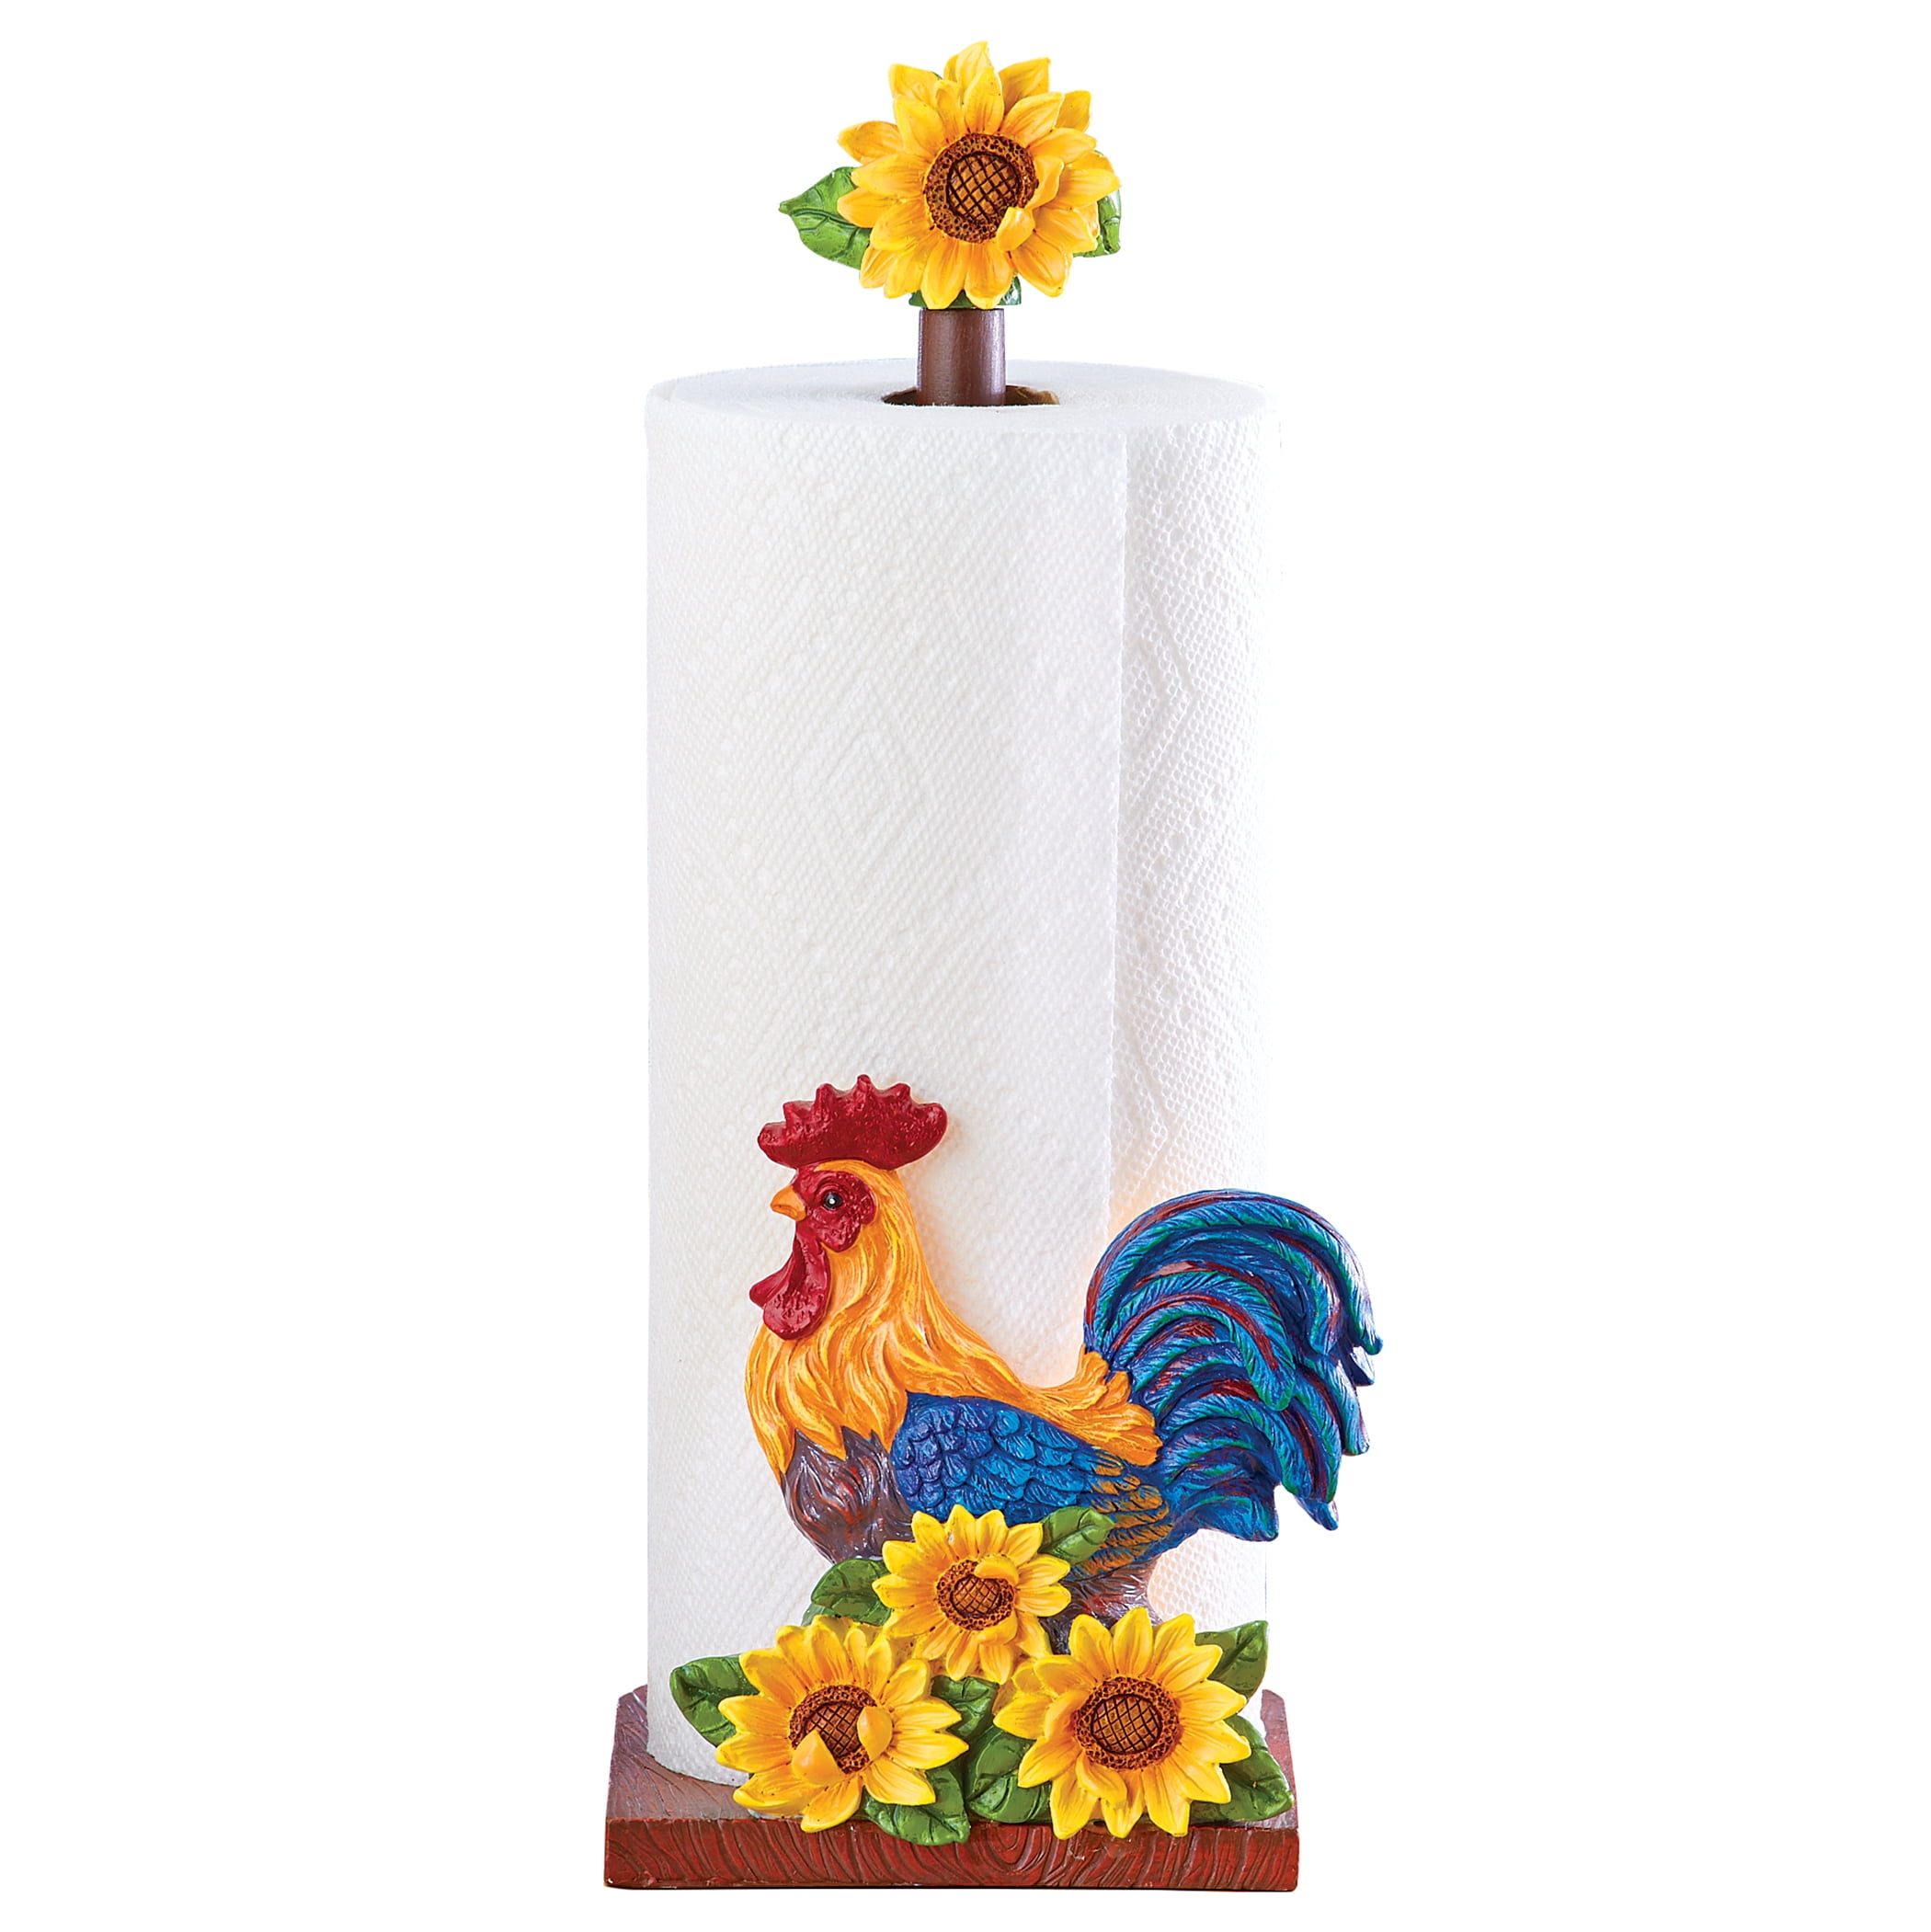 Sunflower Paper Towel Holder Black Metal Rustic Stand for Countertop Farmhouse Paper Towel Holder Stuff Sunflower Kitchen Decor and Accessories for Decorations